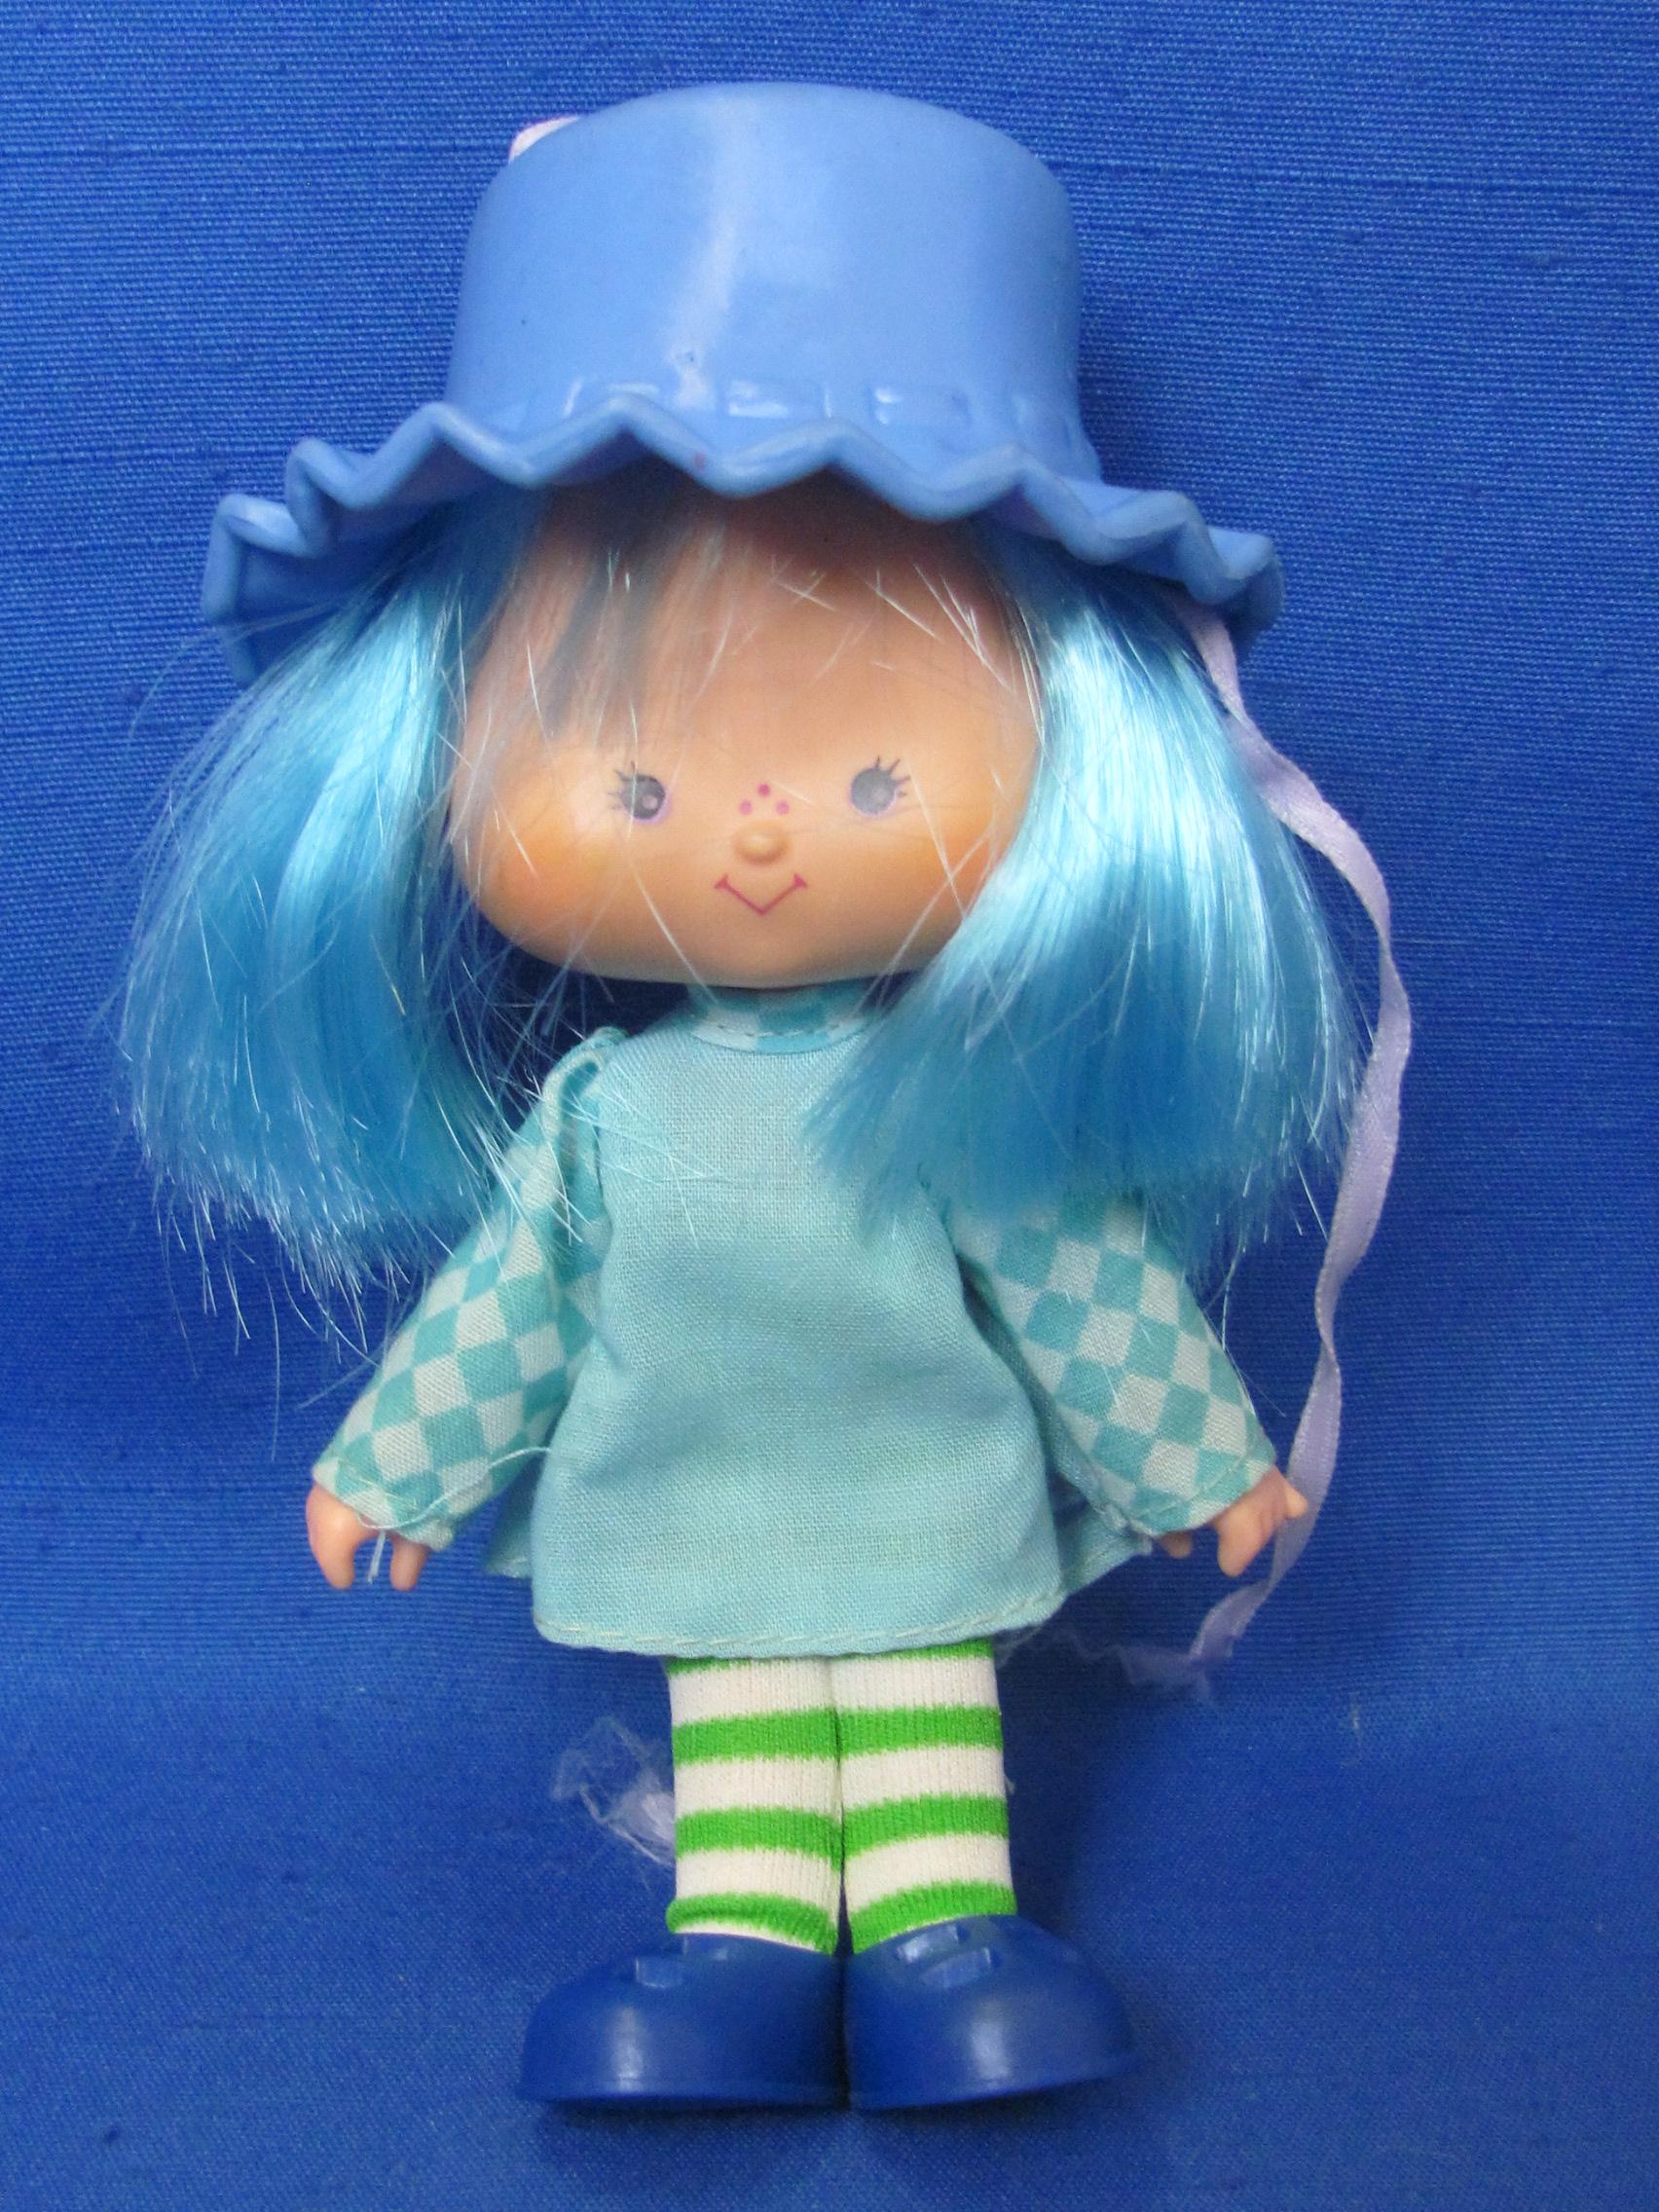 Blueberry Muffin Doll with Cheesecake – 1980s – About 5 1/2” tall